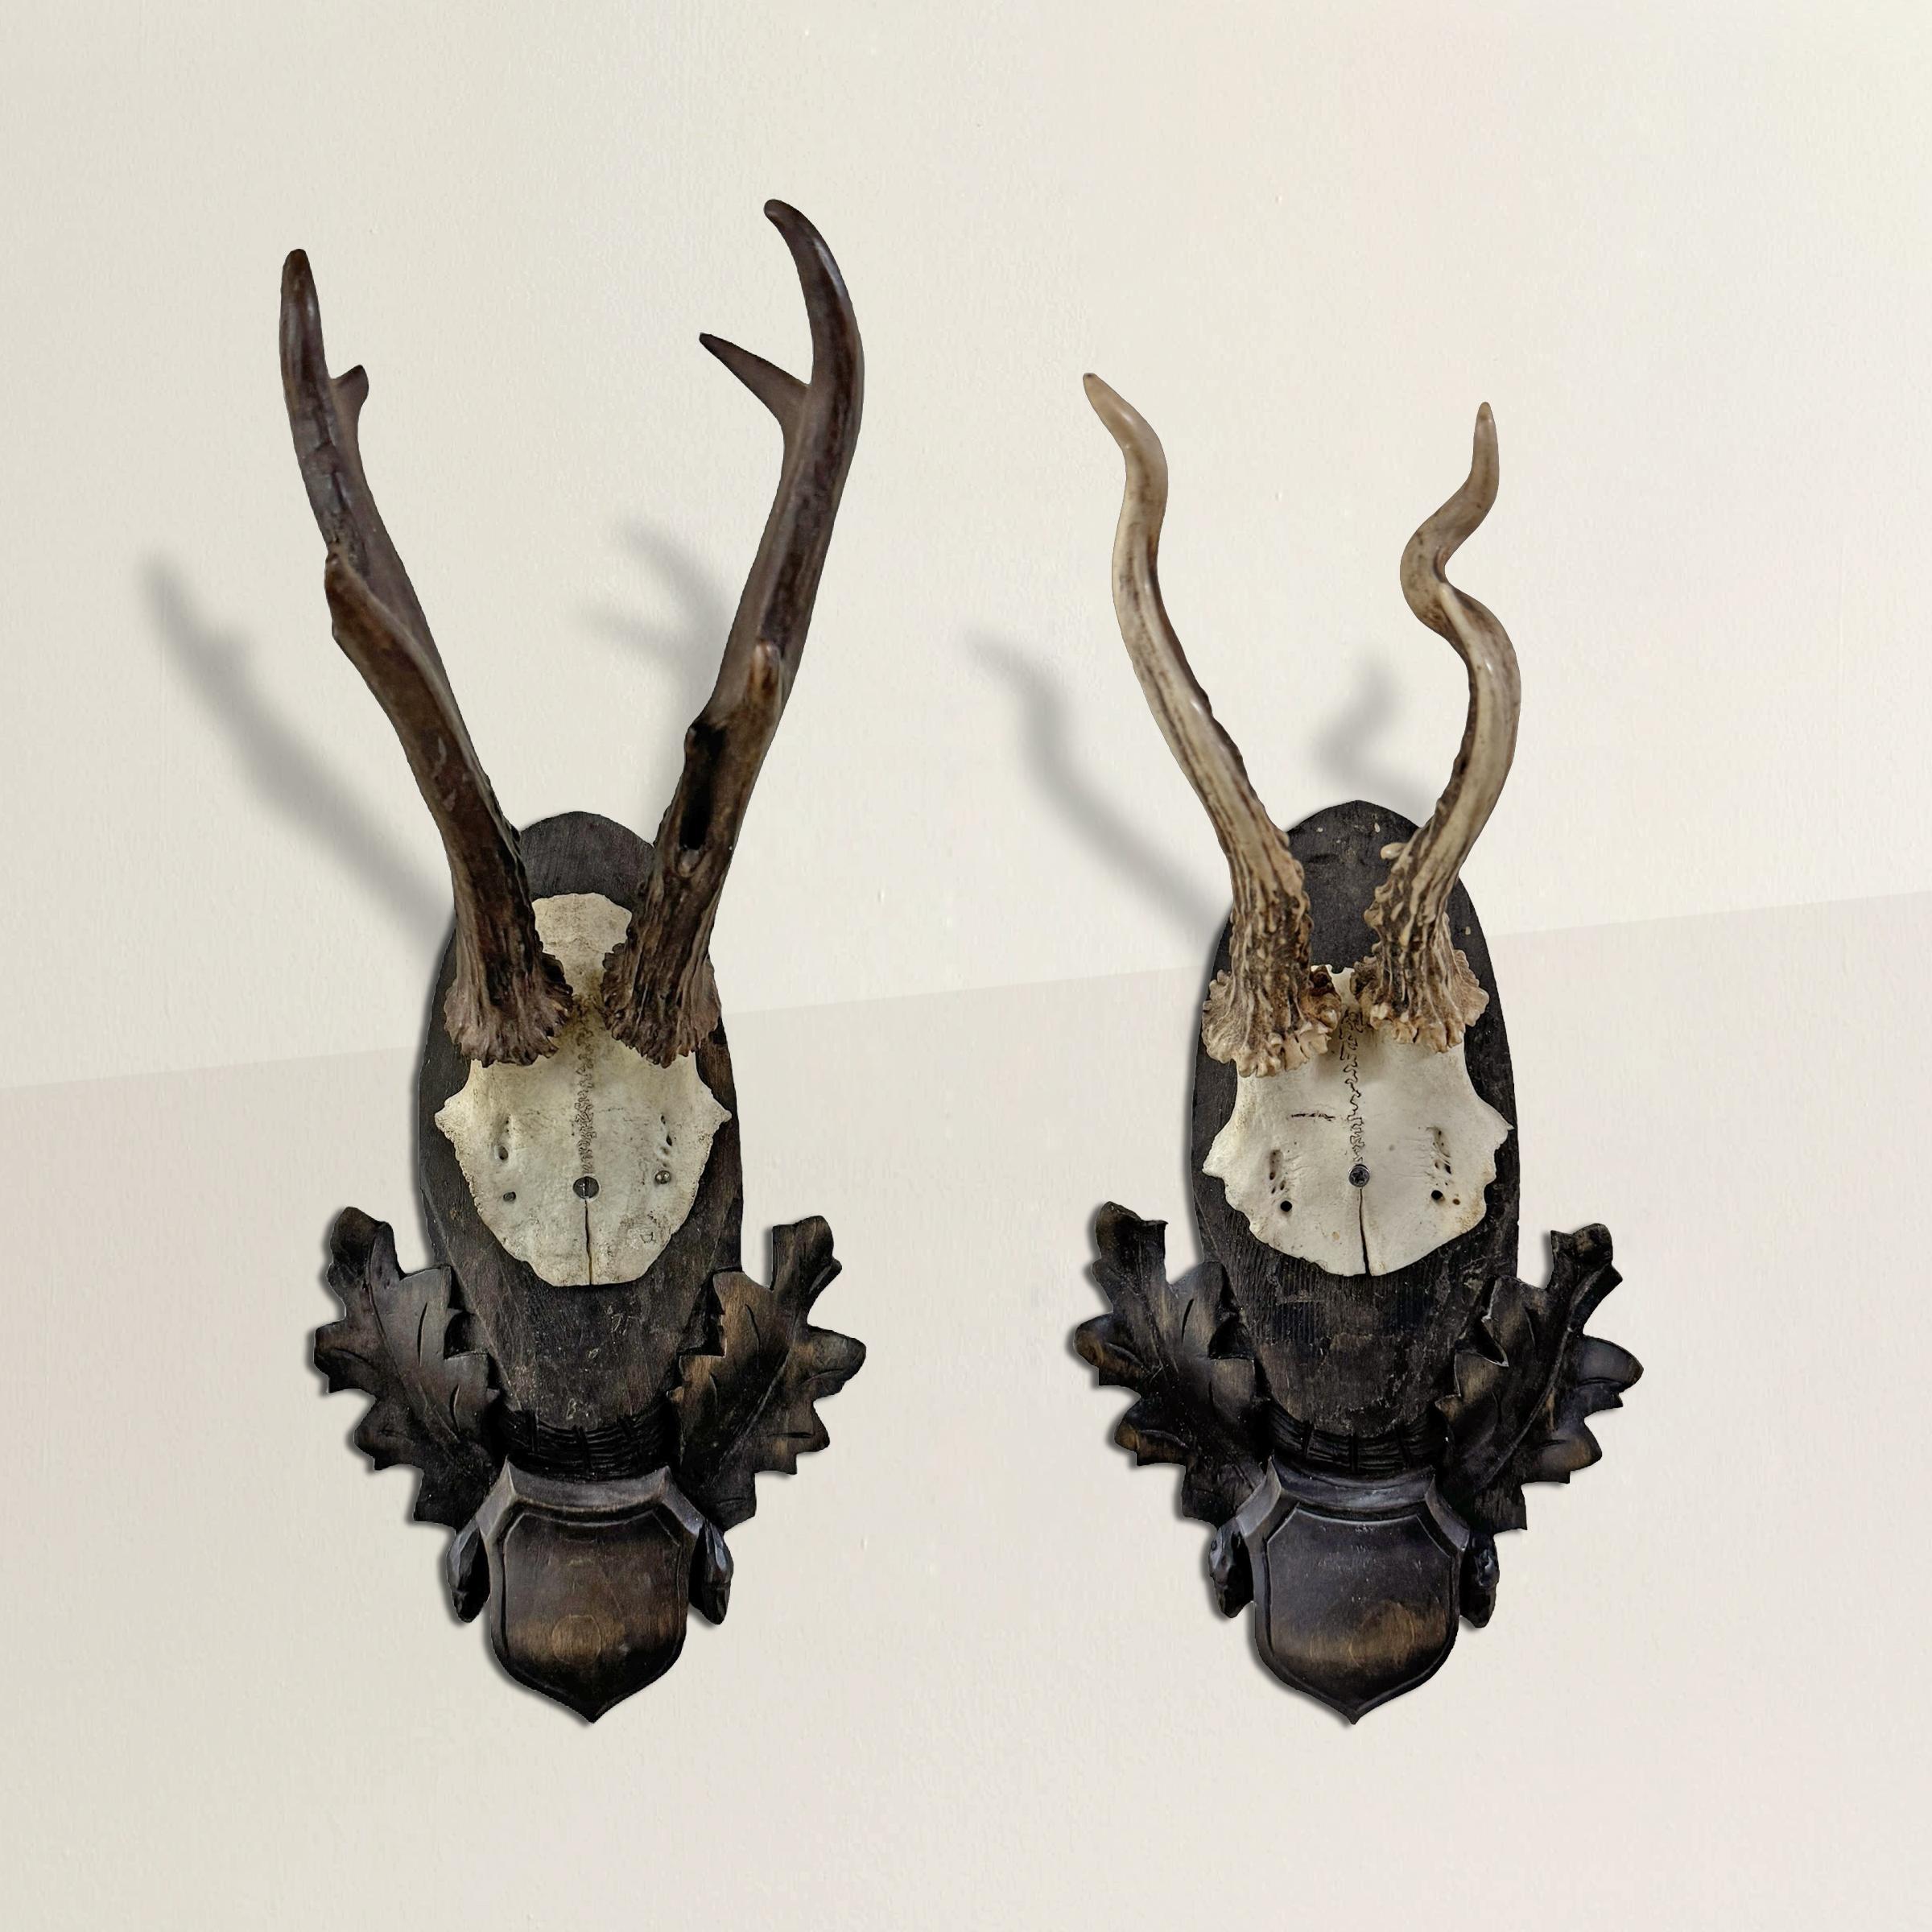 These early 20th century German Roe Deer mounts, originating from a prestigious hunting lodge, exude the grandeur and tradition of the sport. Mounted on intricately carved wood plaques adorned with oak leaves and shields, they serve as both trophies